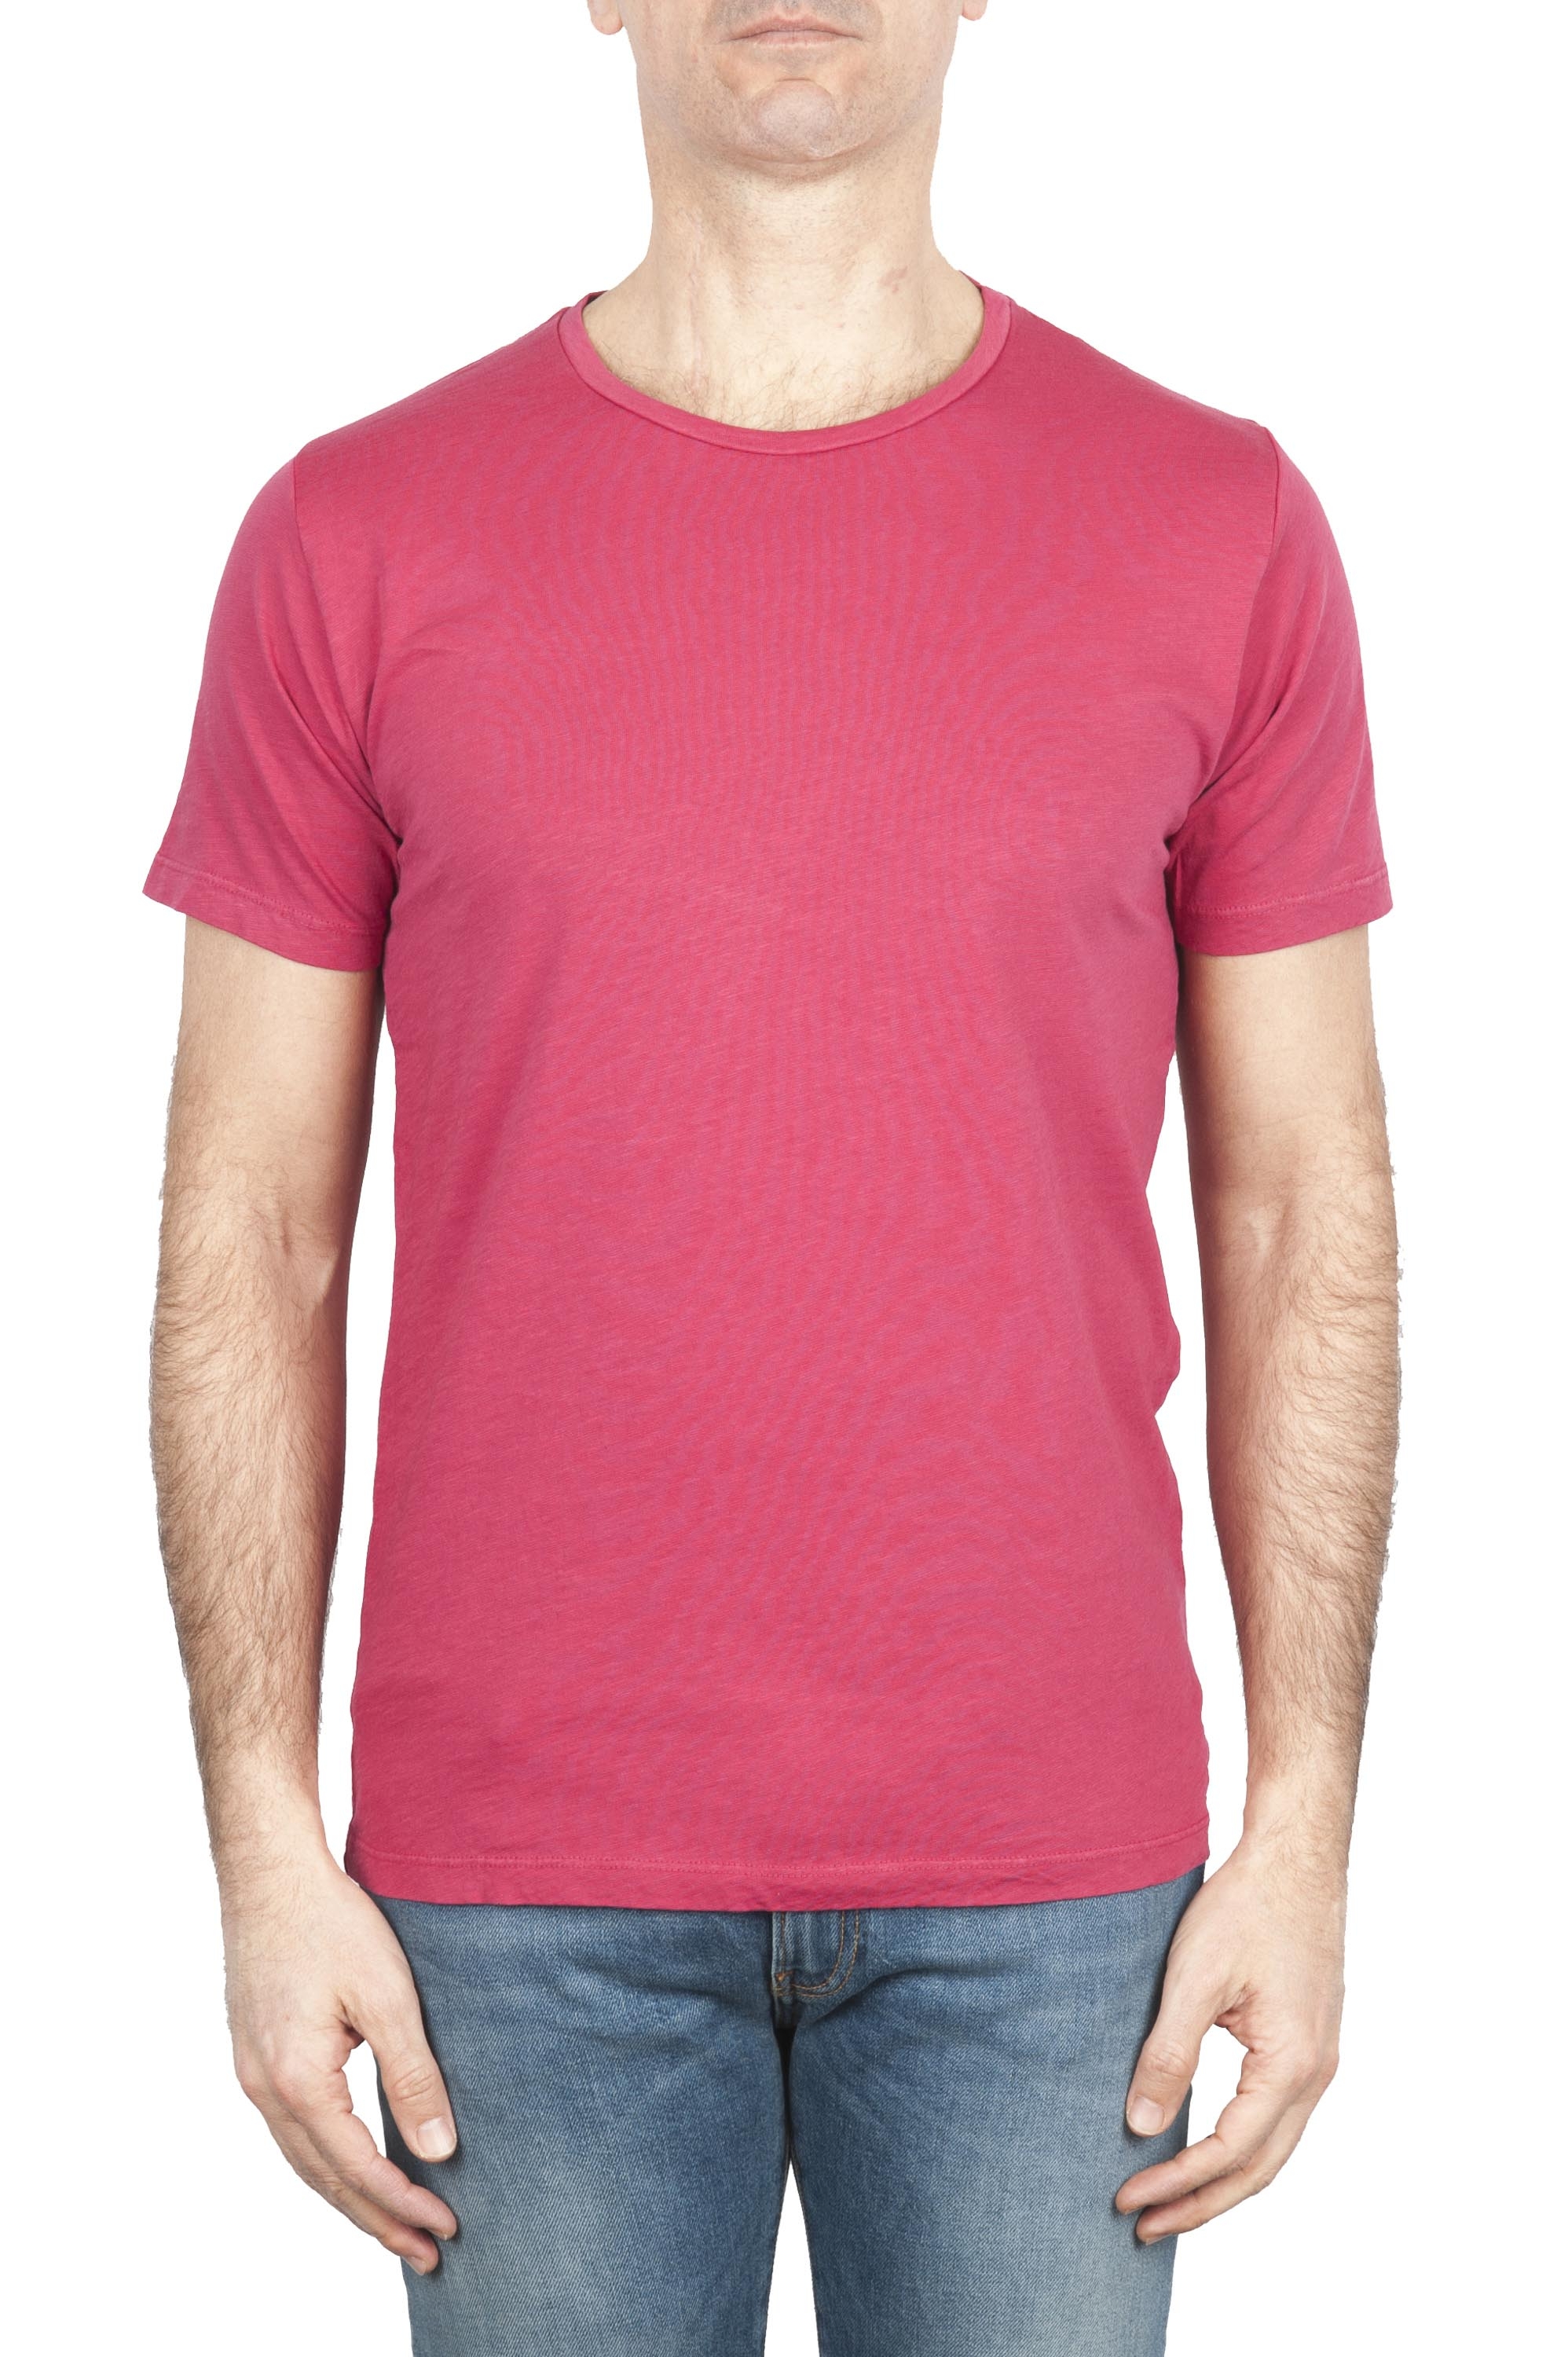 SBU 01643_19AW Flamed cotton scoop neck t-shirt red 01